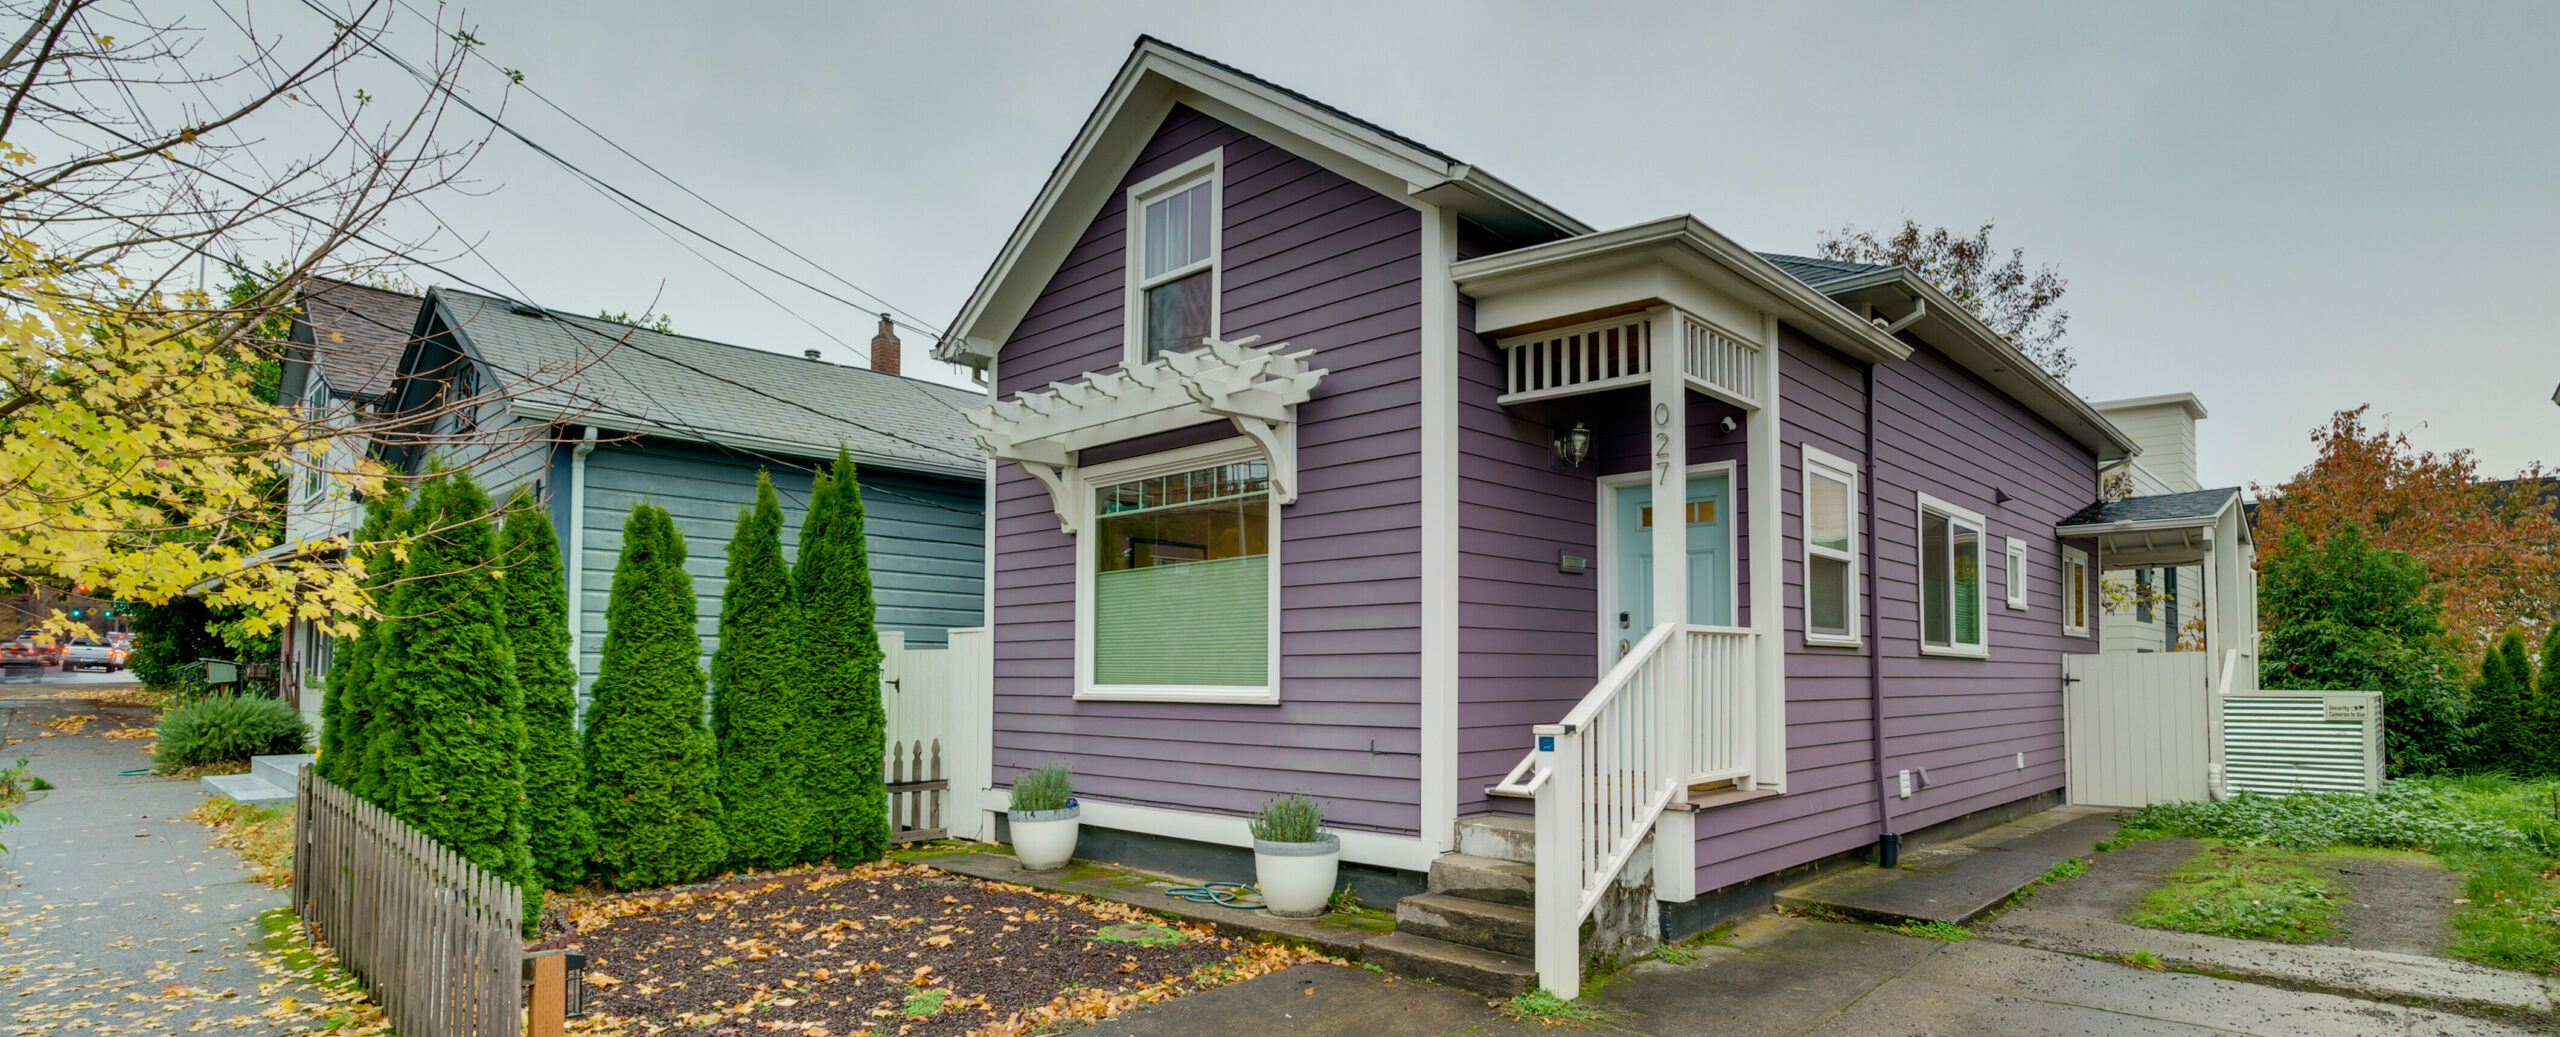 Just Listed! Quaint and Purple!